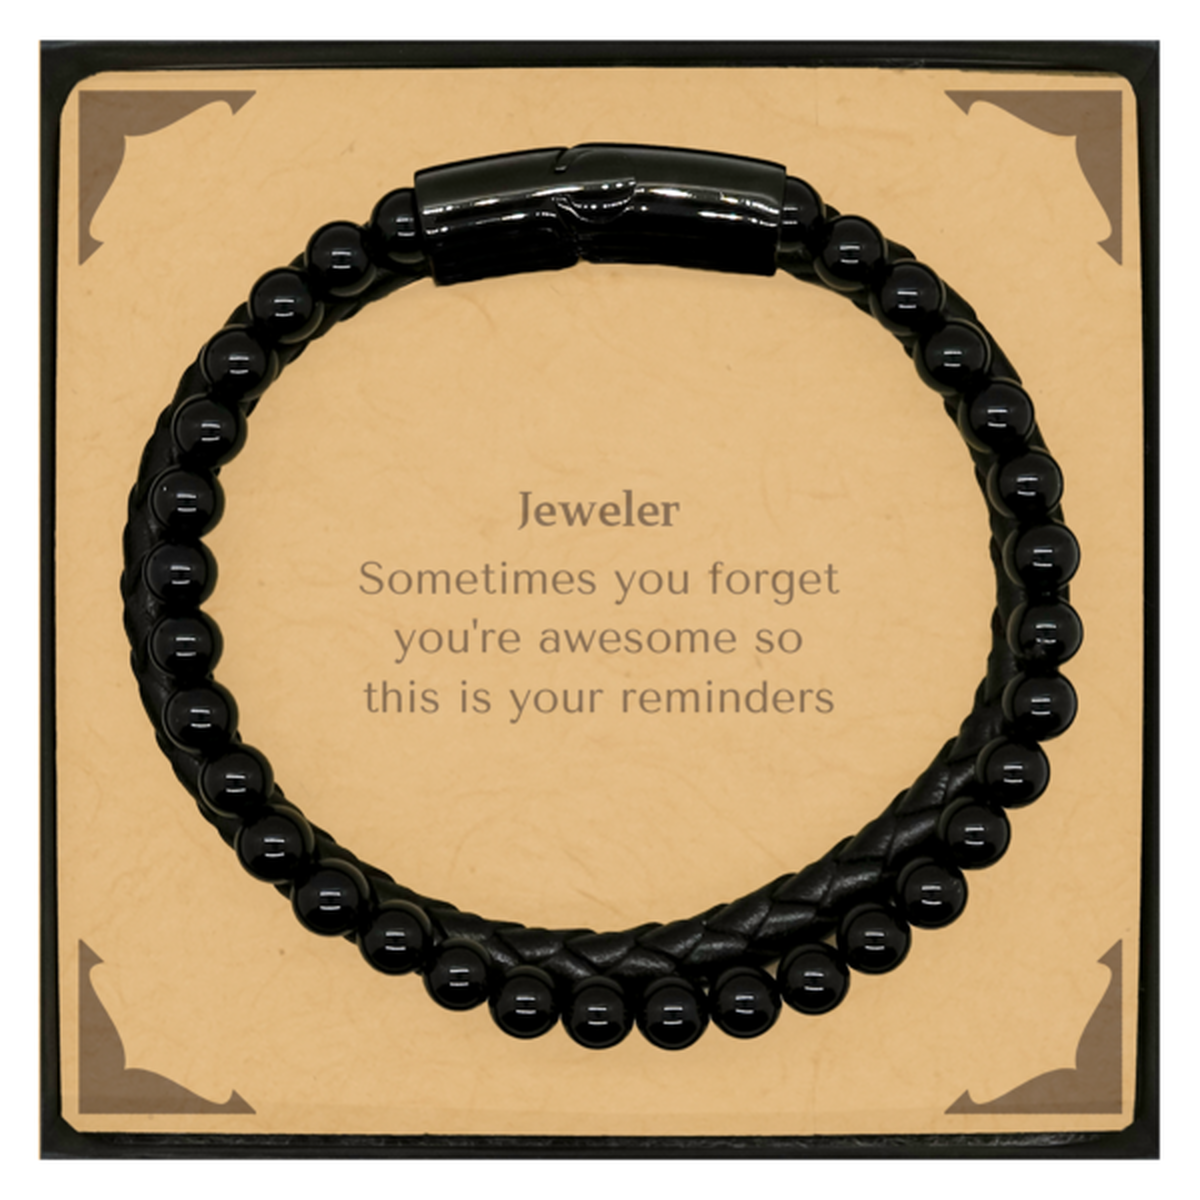 Sentimental Jeweler Stone Leather Bracelets, Jeweler Sometimes you forget you're awesome so this is your reminders, Graduation Christmas Birthday Gifts for Jeweler, Men, Women, Coworkers